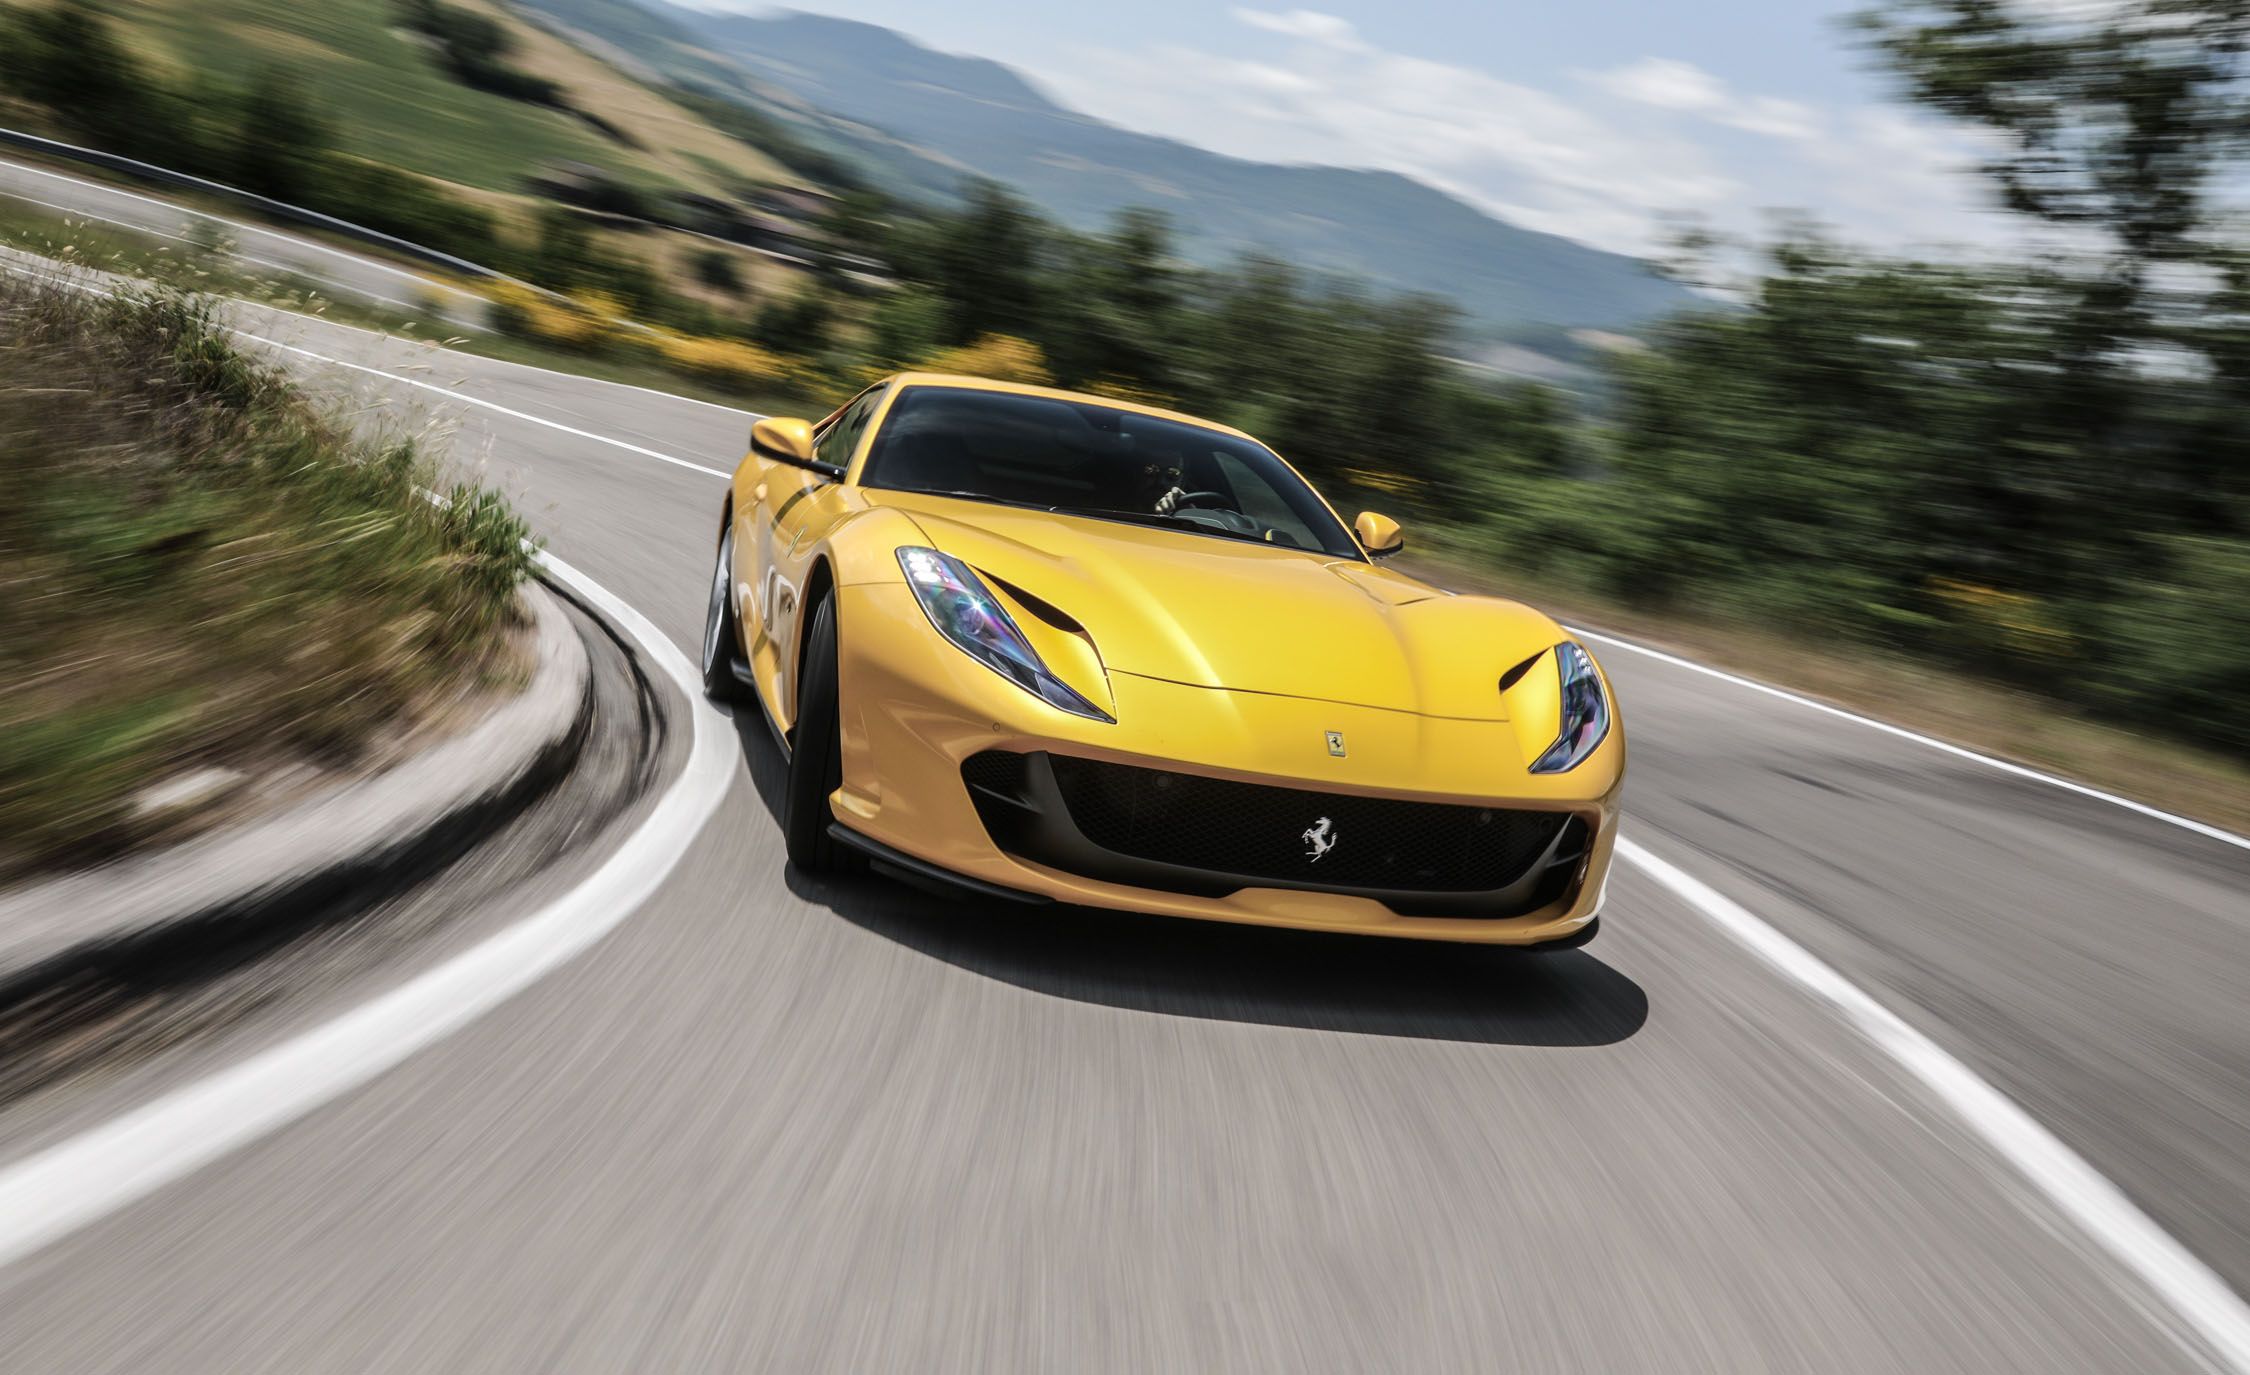 2019 Ferrari Review, Pricing, and Specs